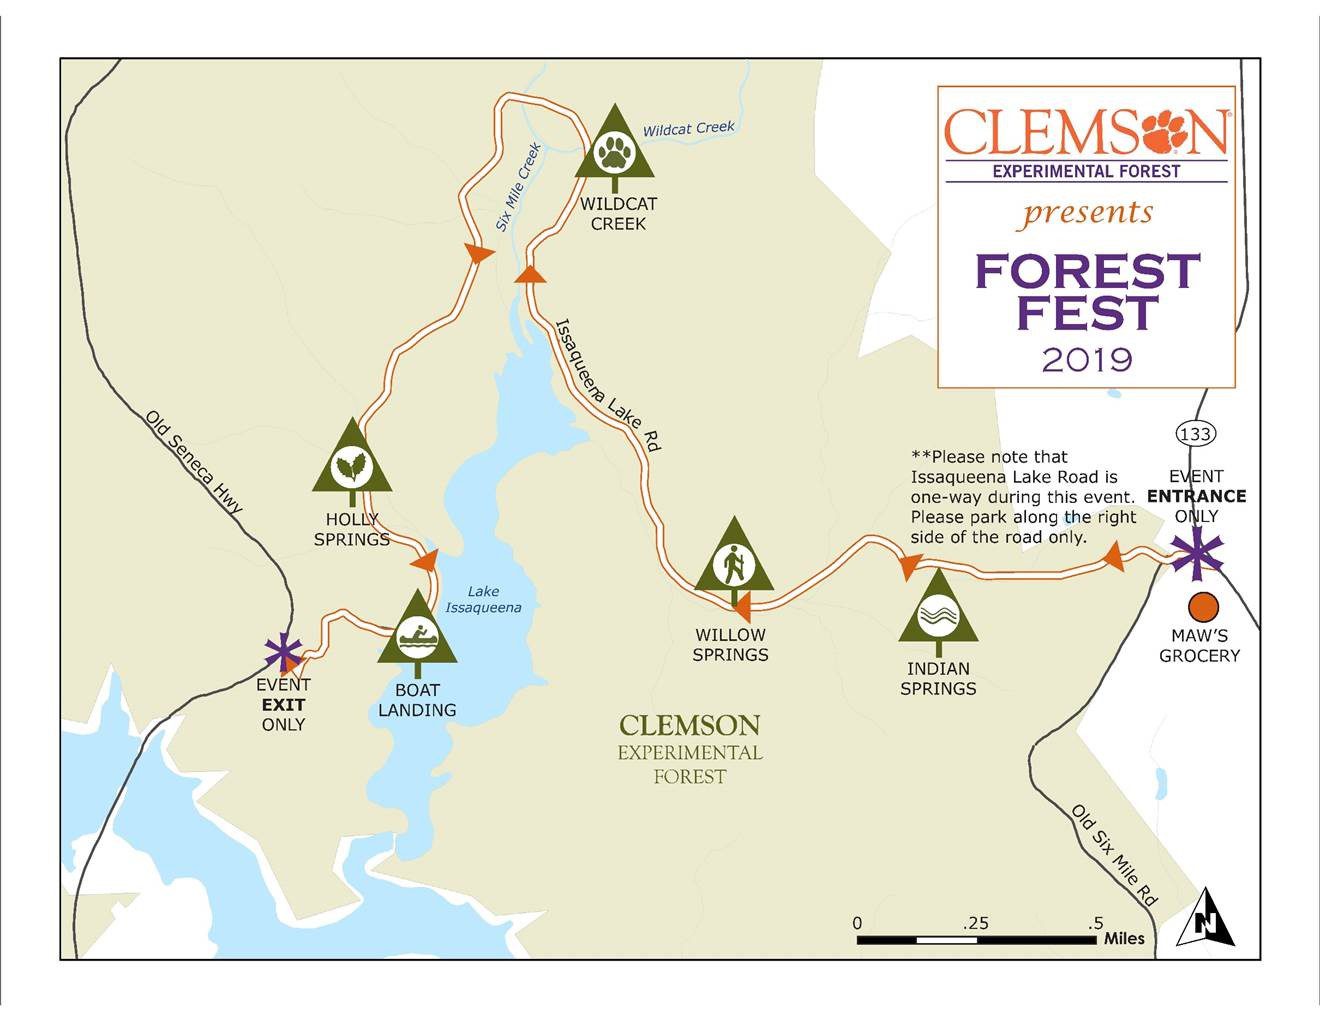 A map of Forest Fest area and entrance that will assist visitors.